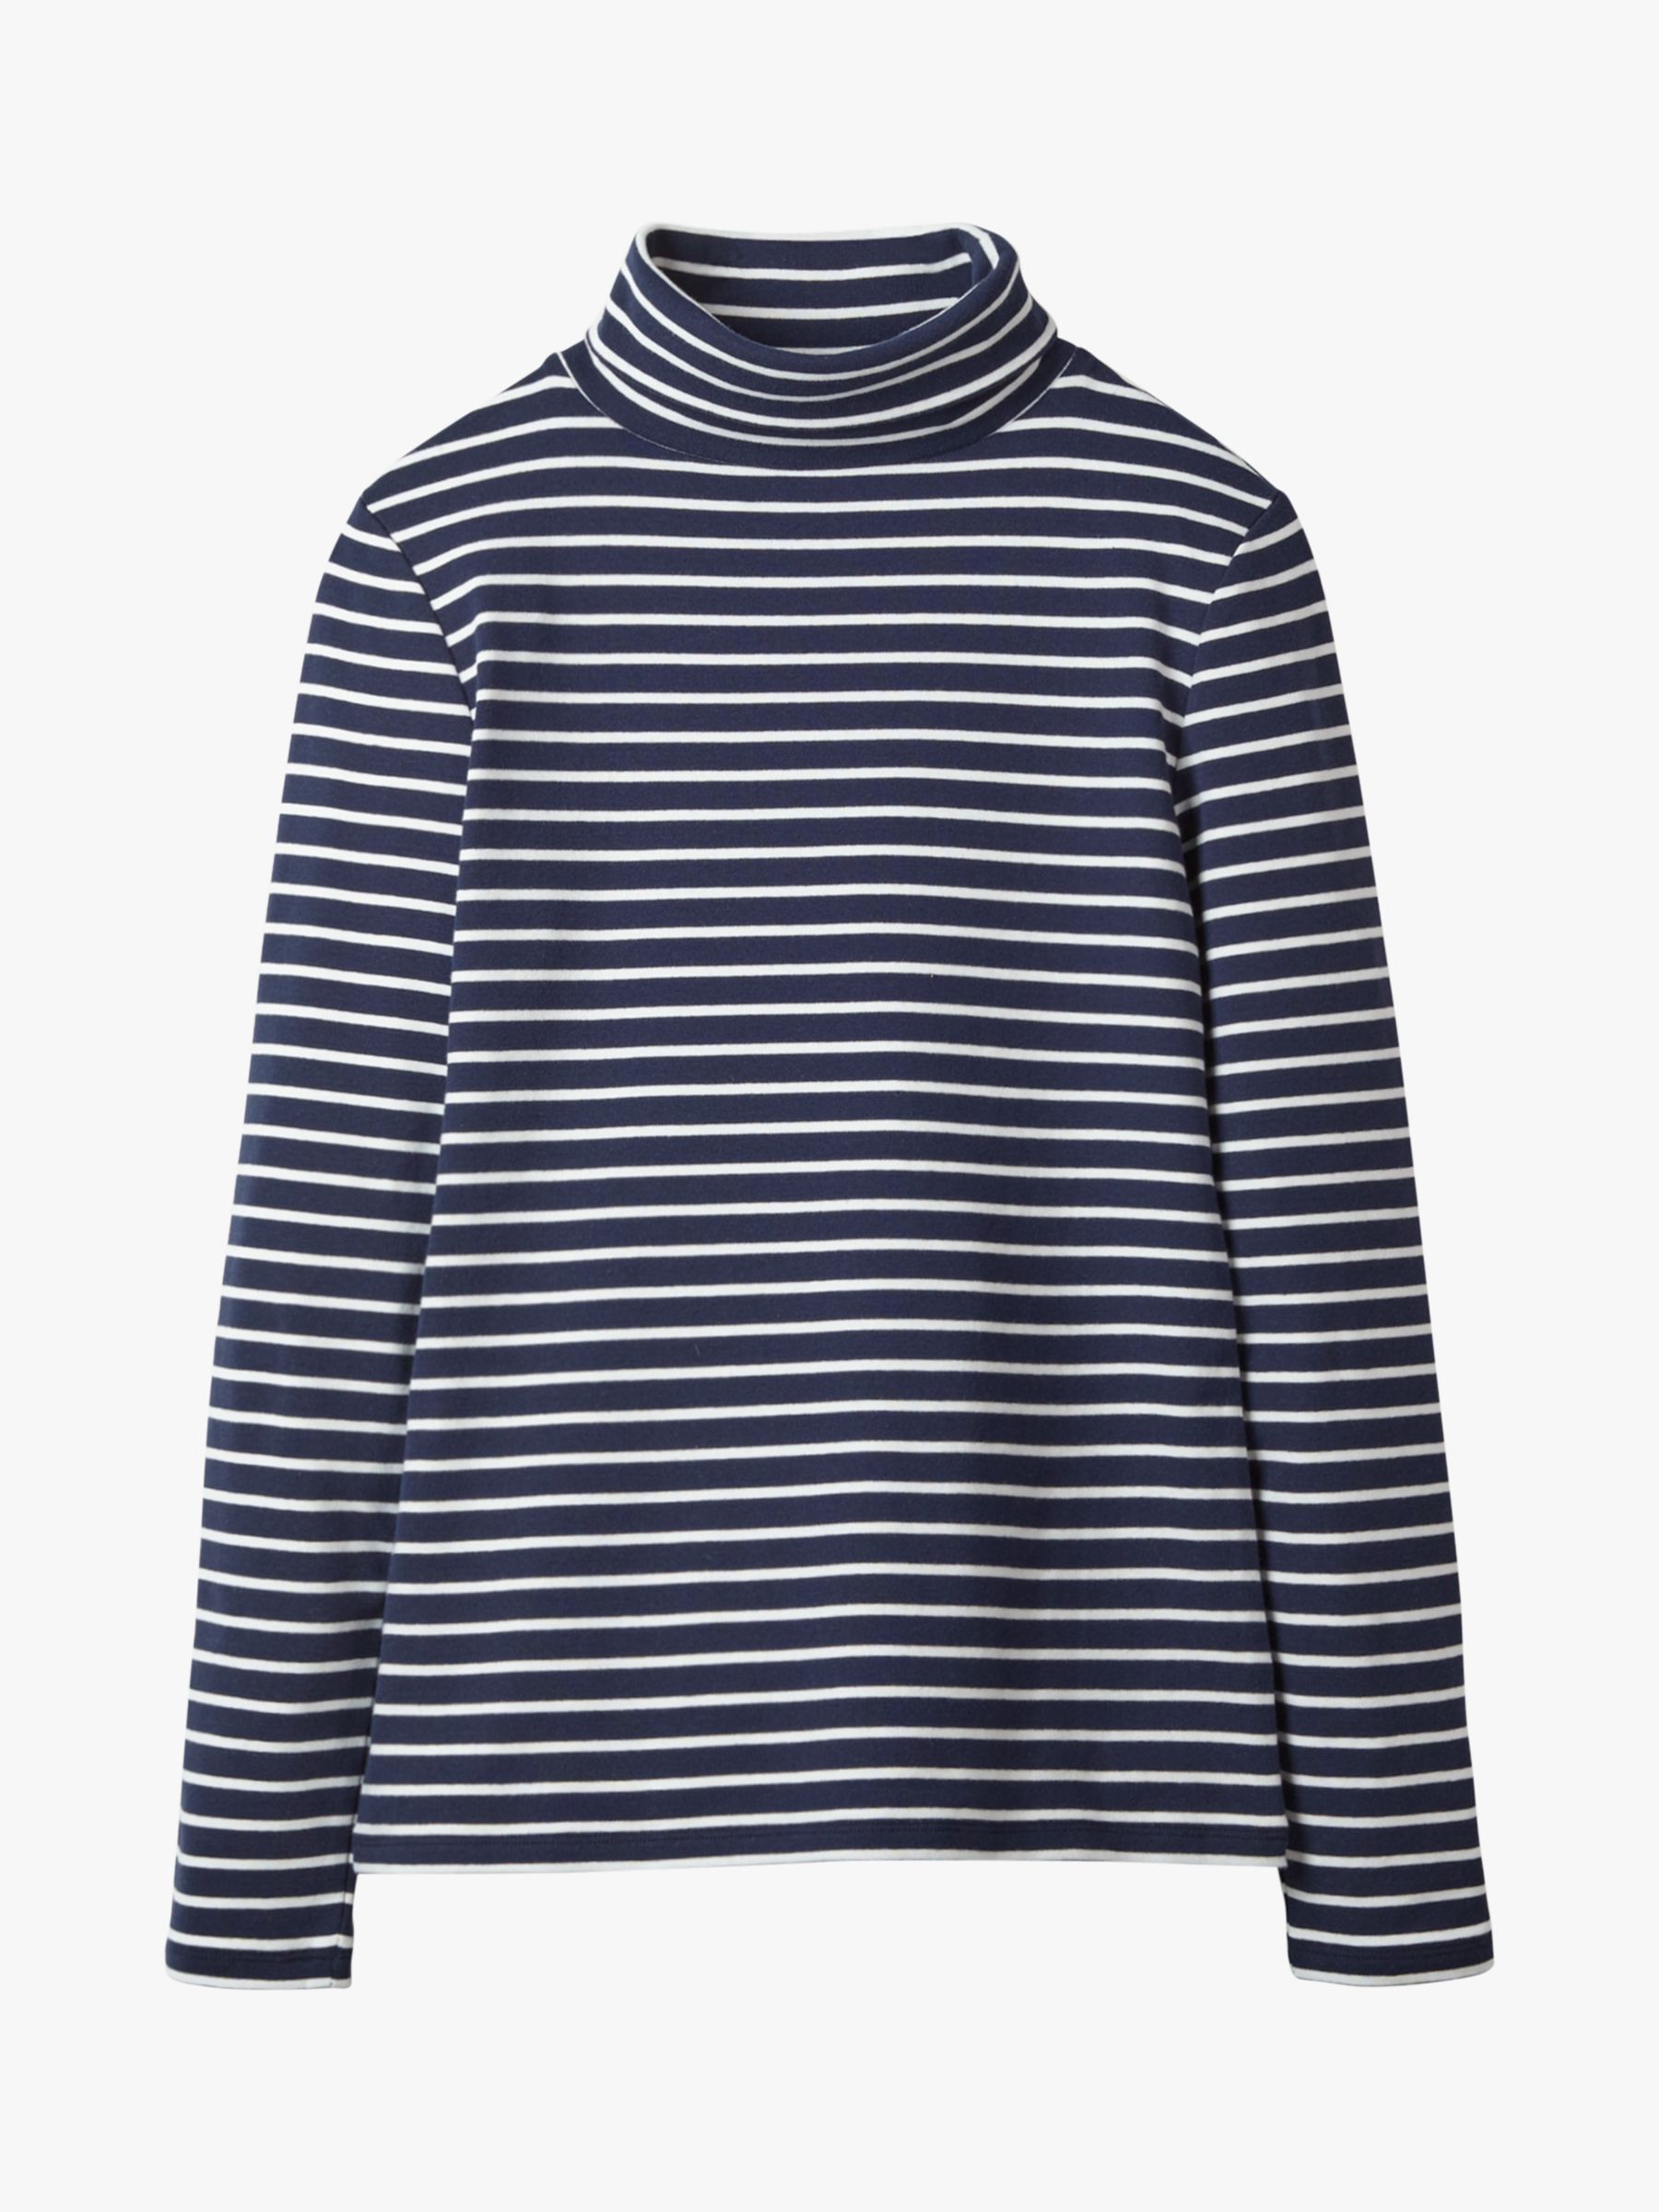 Boden Essential Stripe Roll Neck Top, Navy/Ivory at John Lewis & Partners